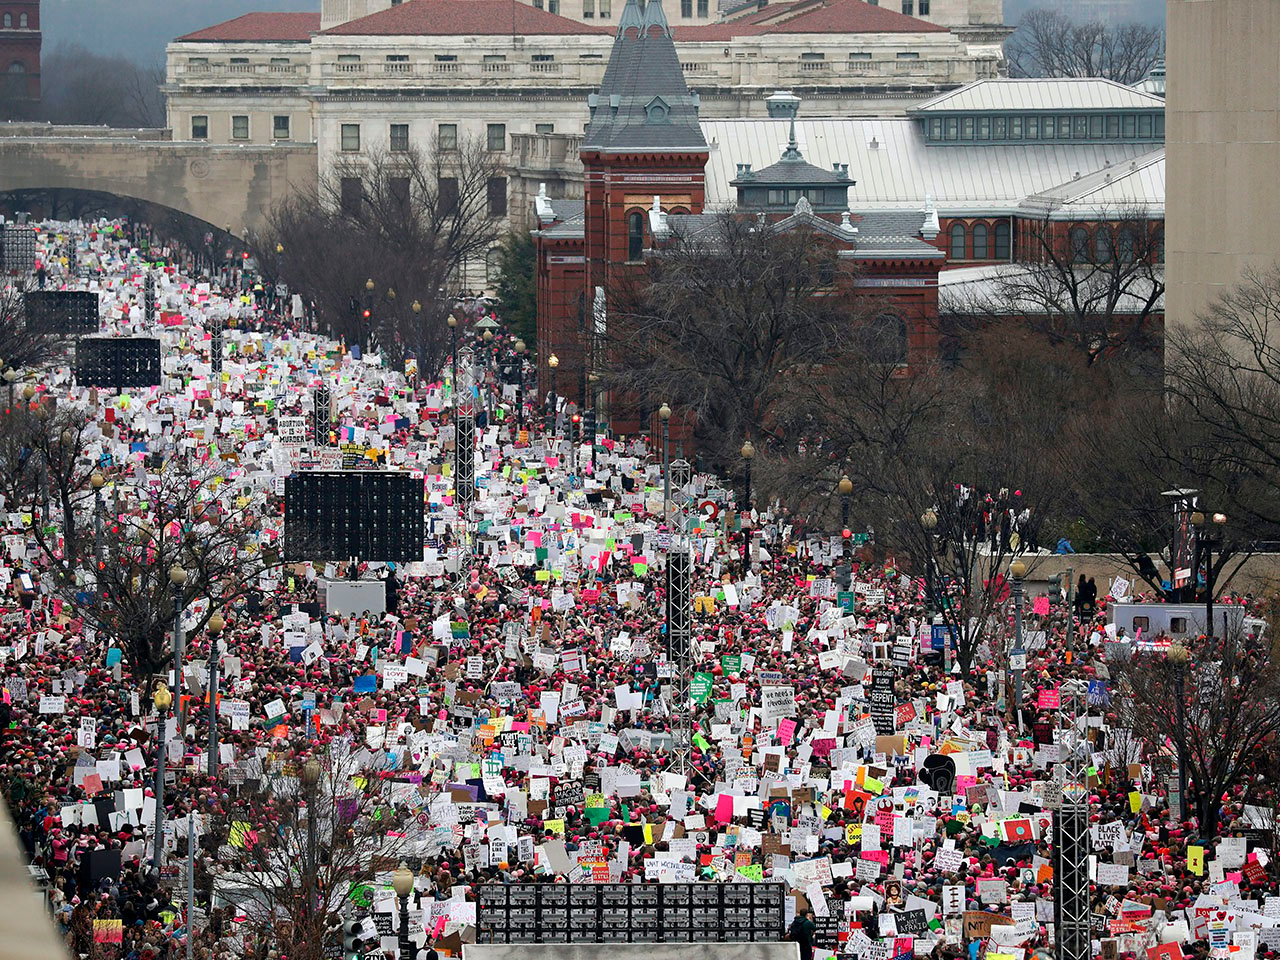 A crowd at the Women's March on Washington